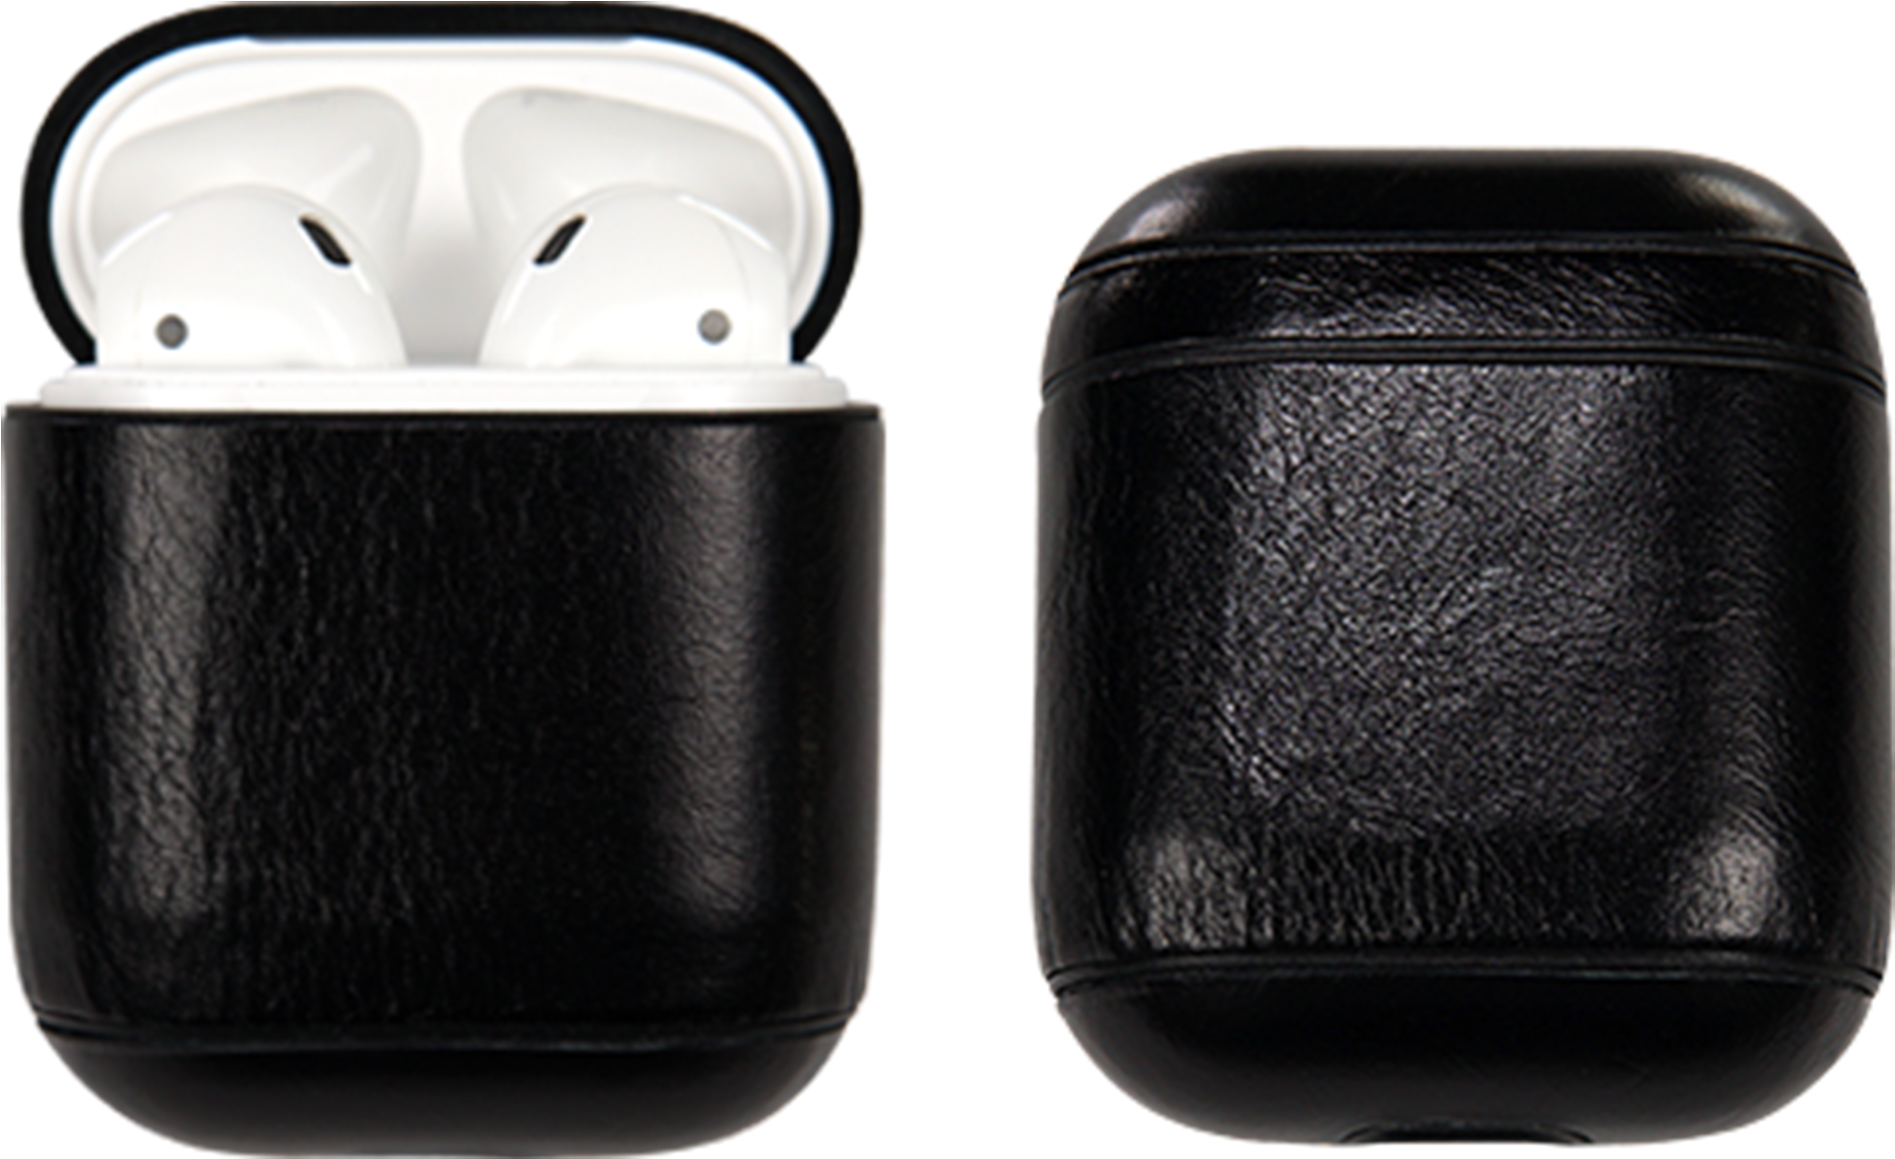 A Black Leather Case With White Earbuds In It